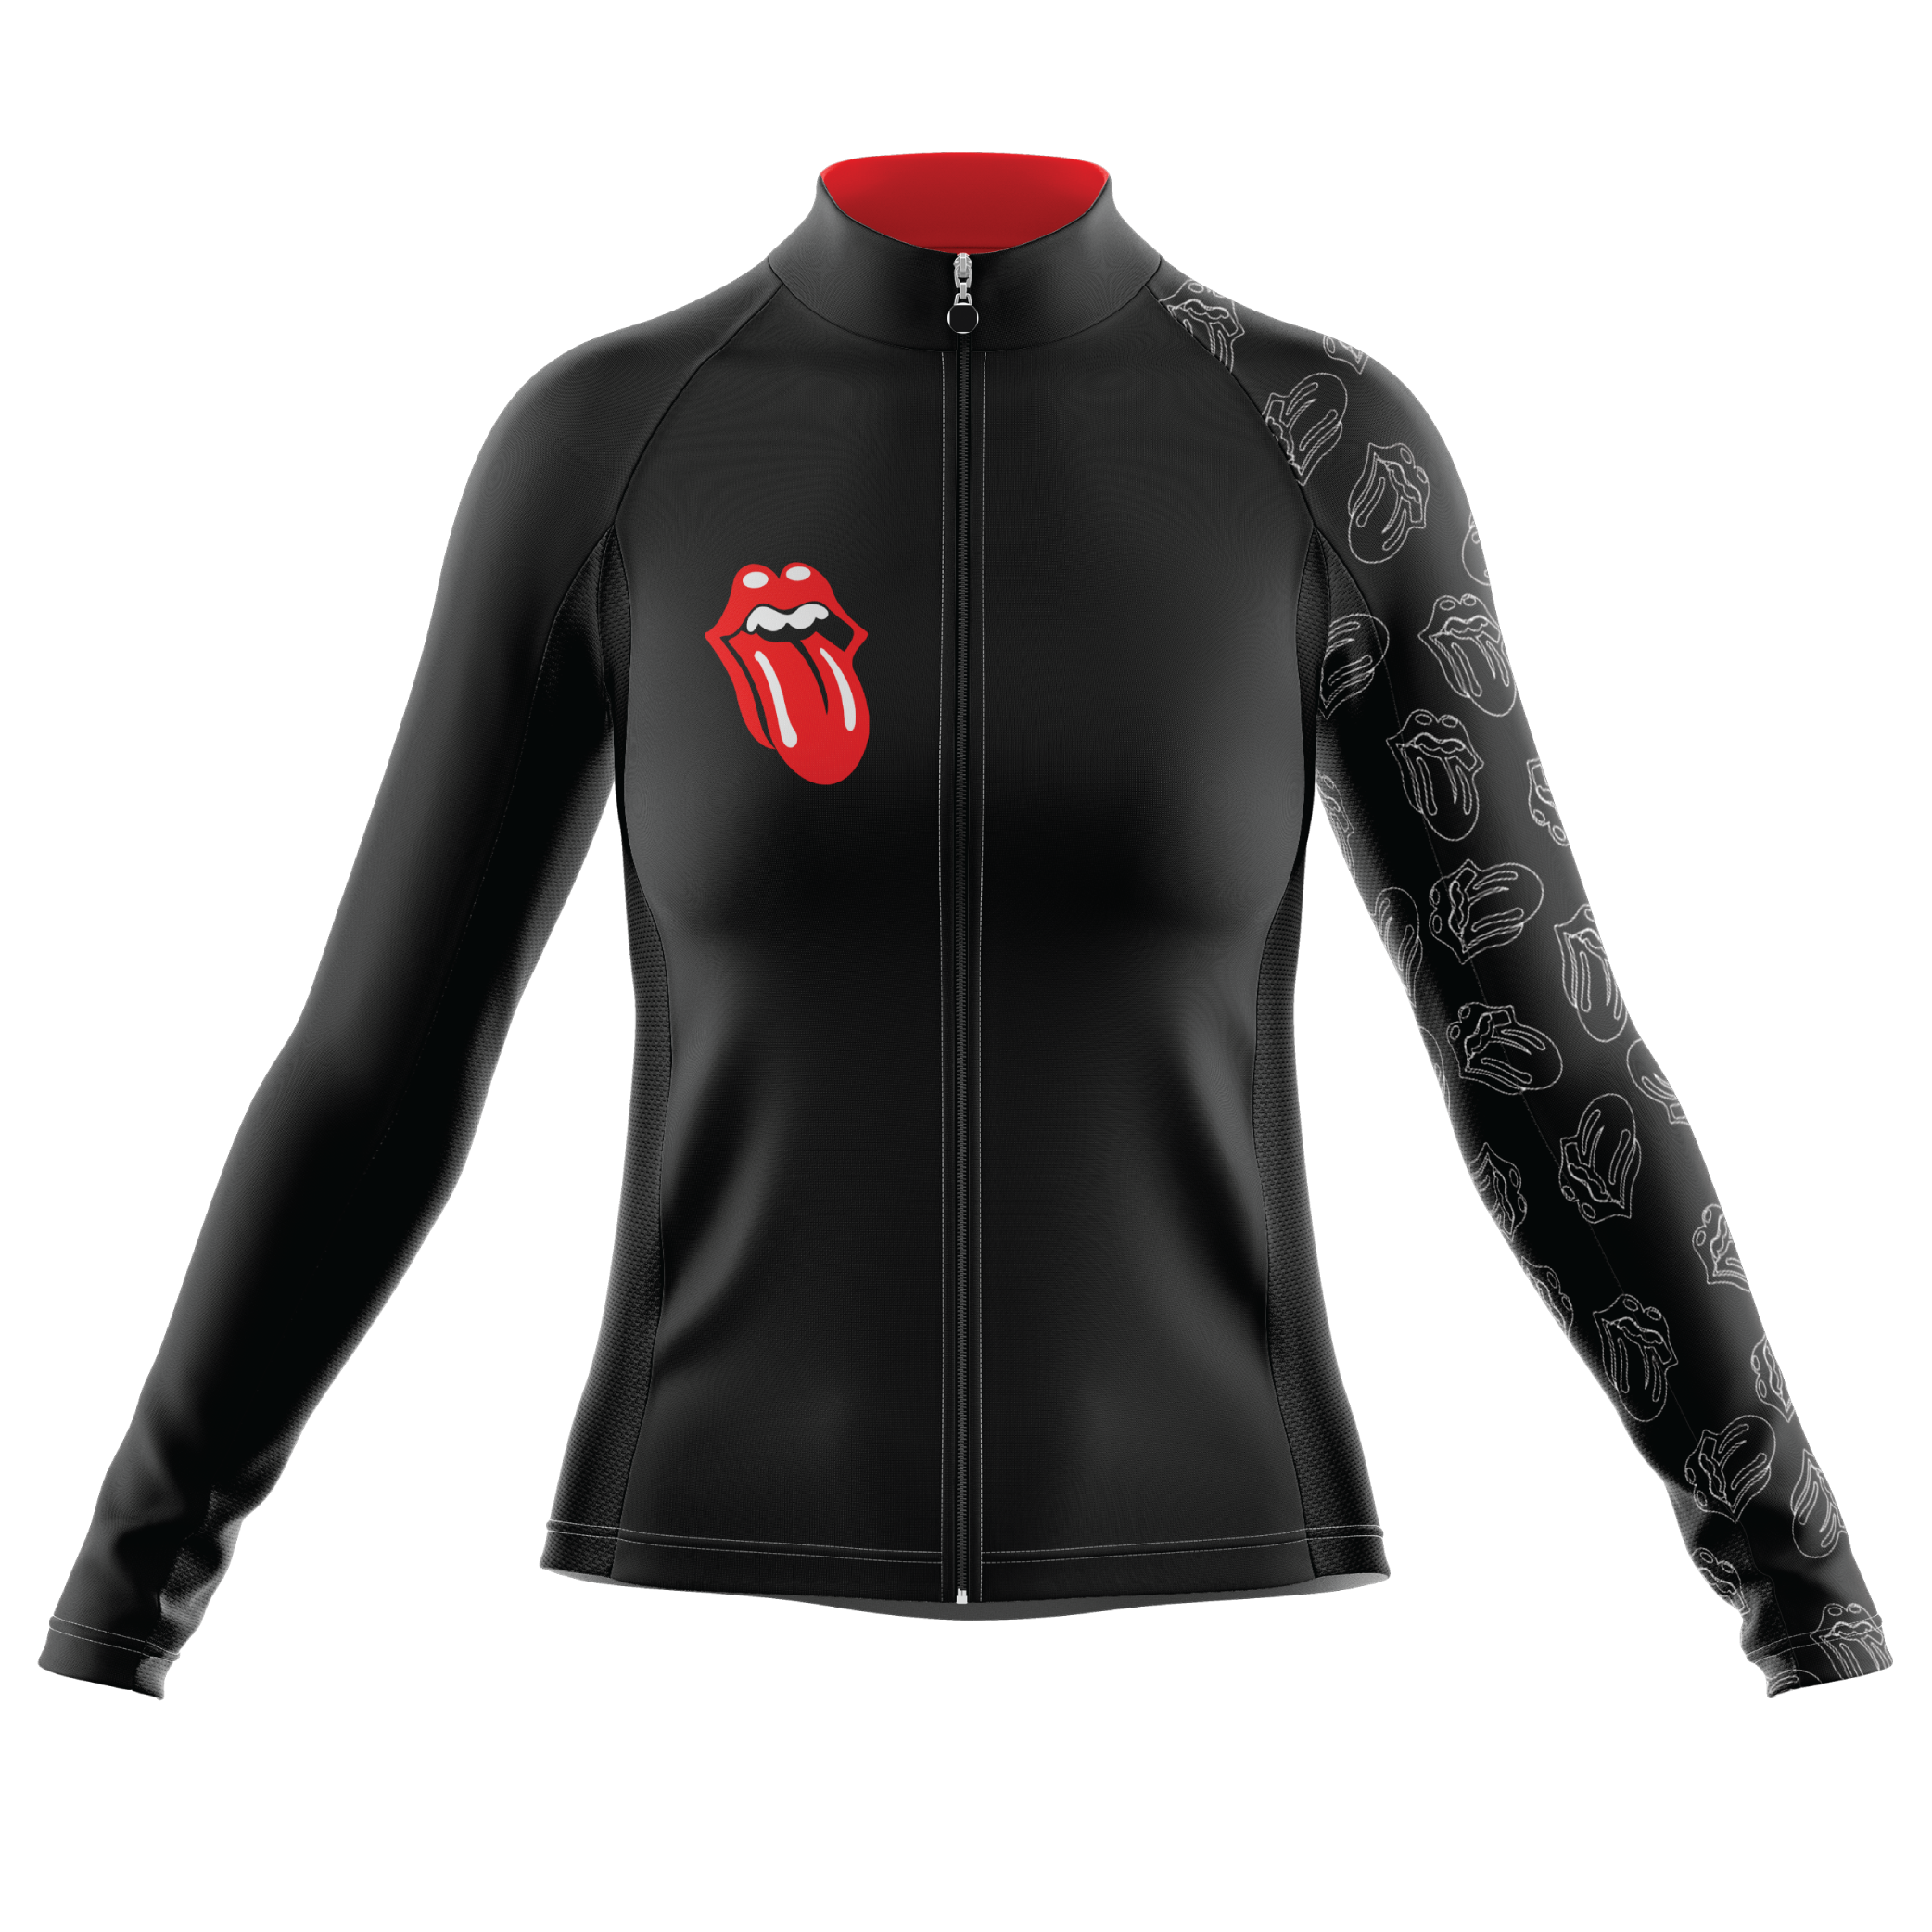 The Stones Bike Team Long Sleeve Cycling Jersey